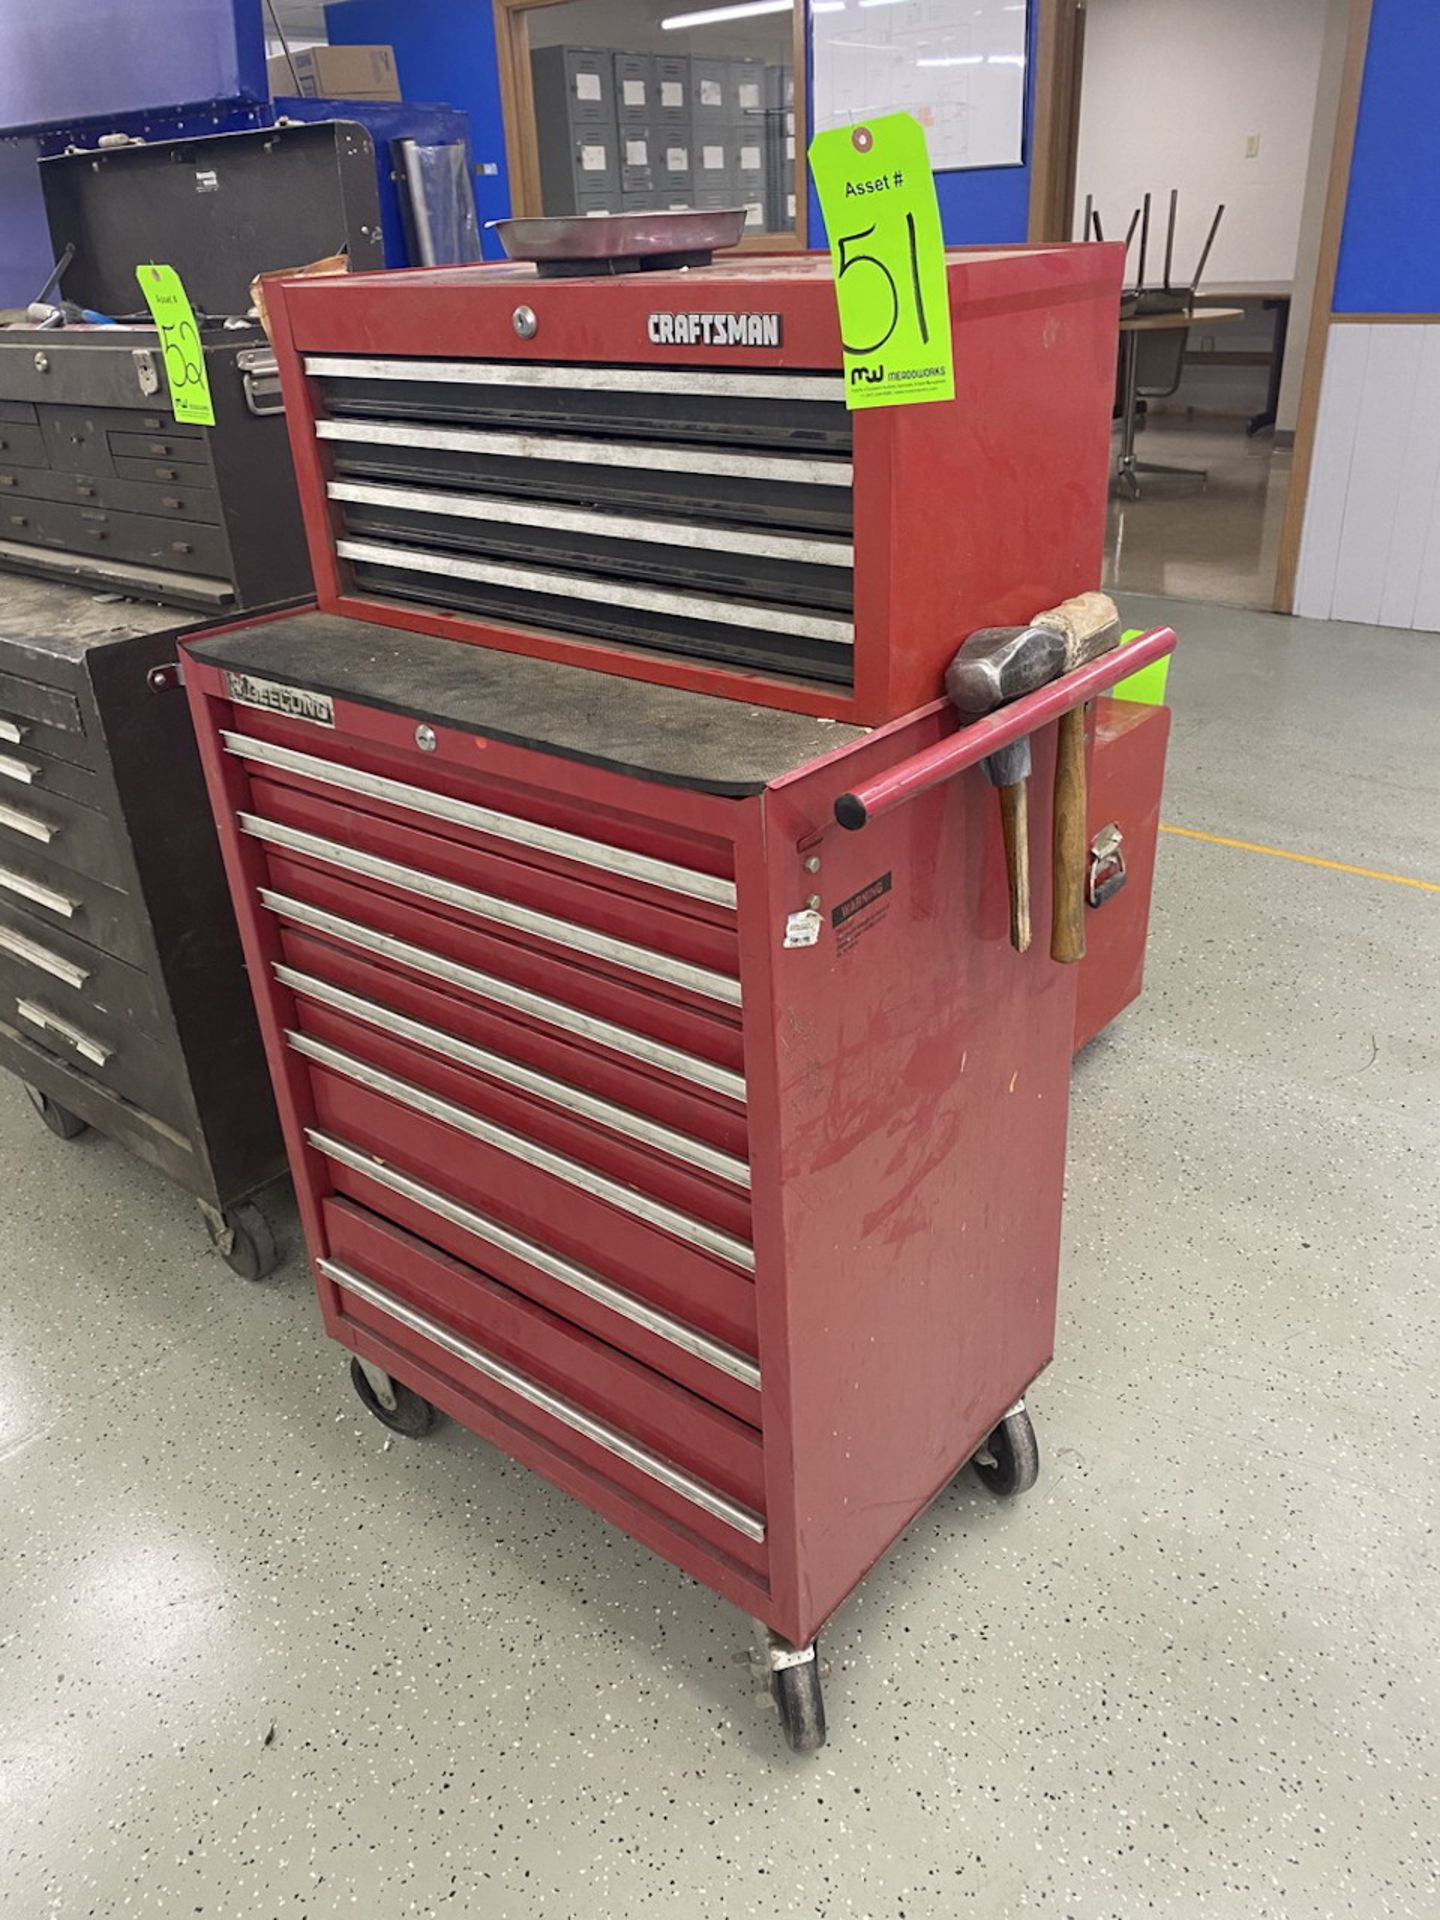 Craftsman 27" x 18" Tool Box with Contents incl. Screwdrivers, Rubber Hammers, and Wrenches - Image 2 of 11